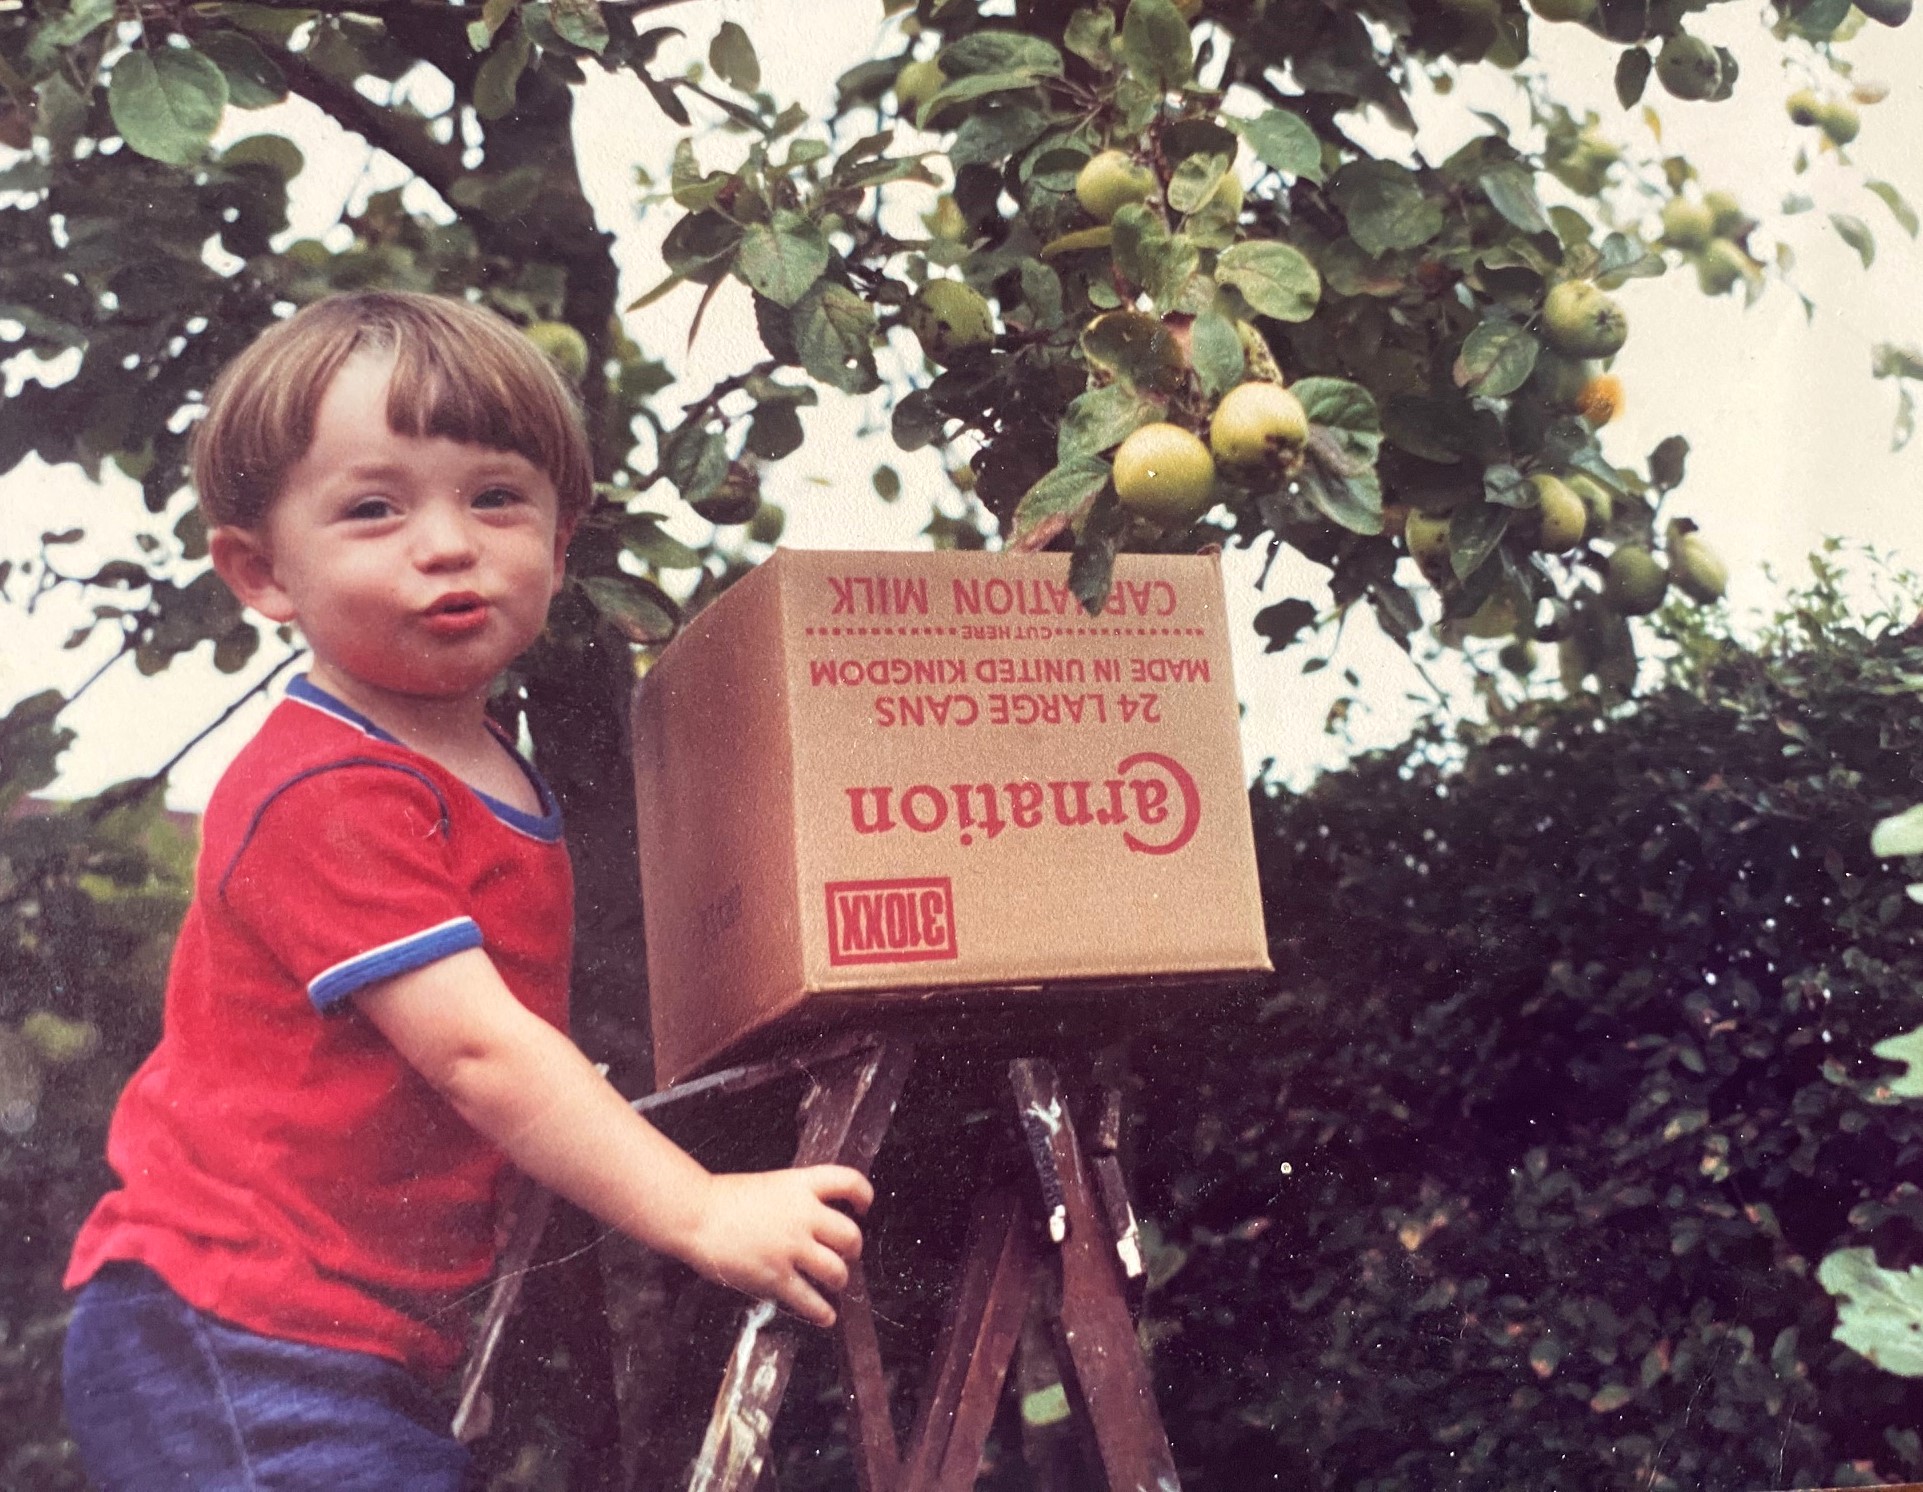 Pick of the crop – a young Andrew Butterworth enjoys climbing the step ladders to get some apples.